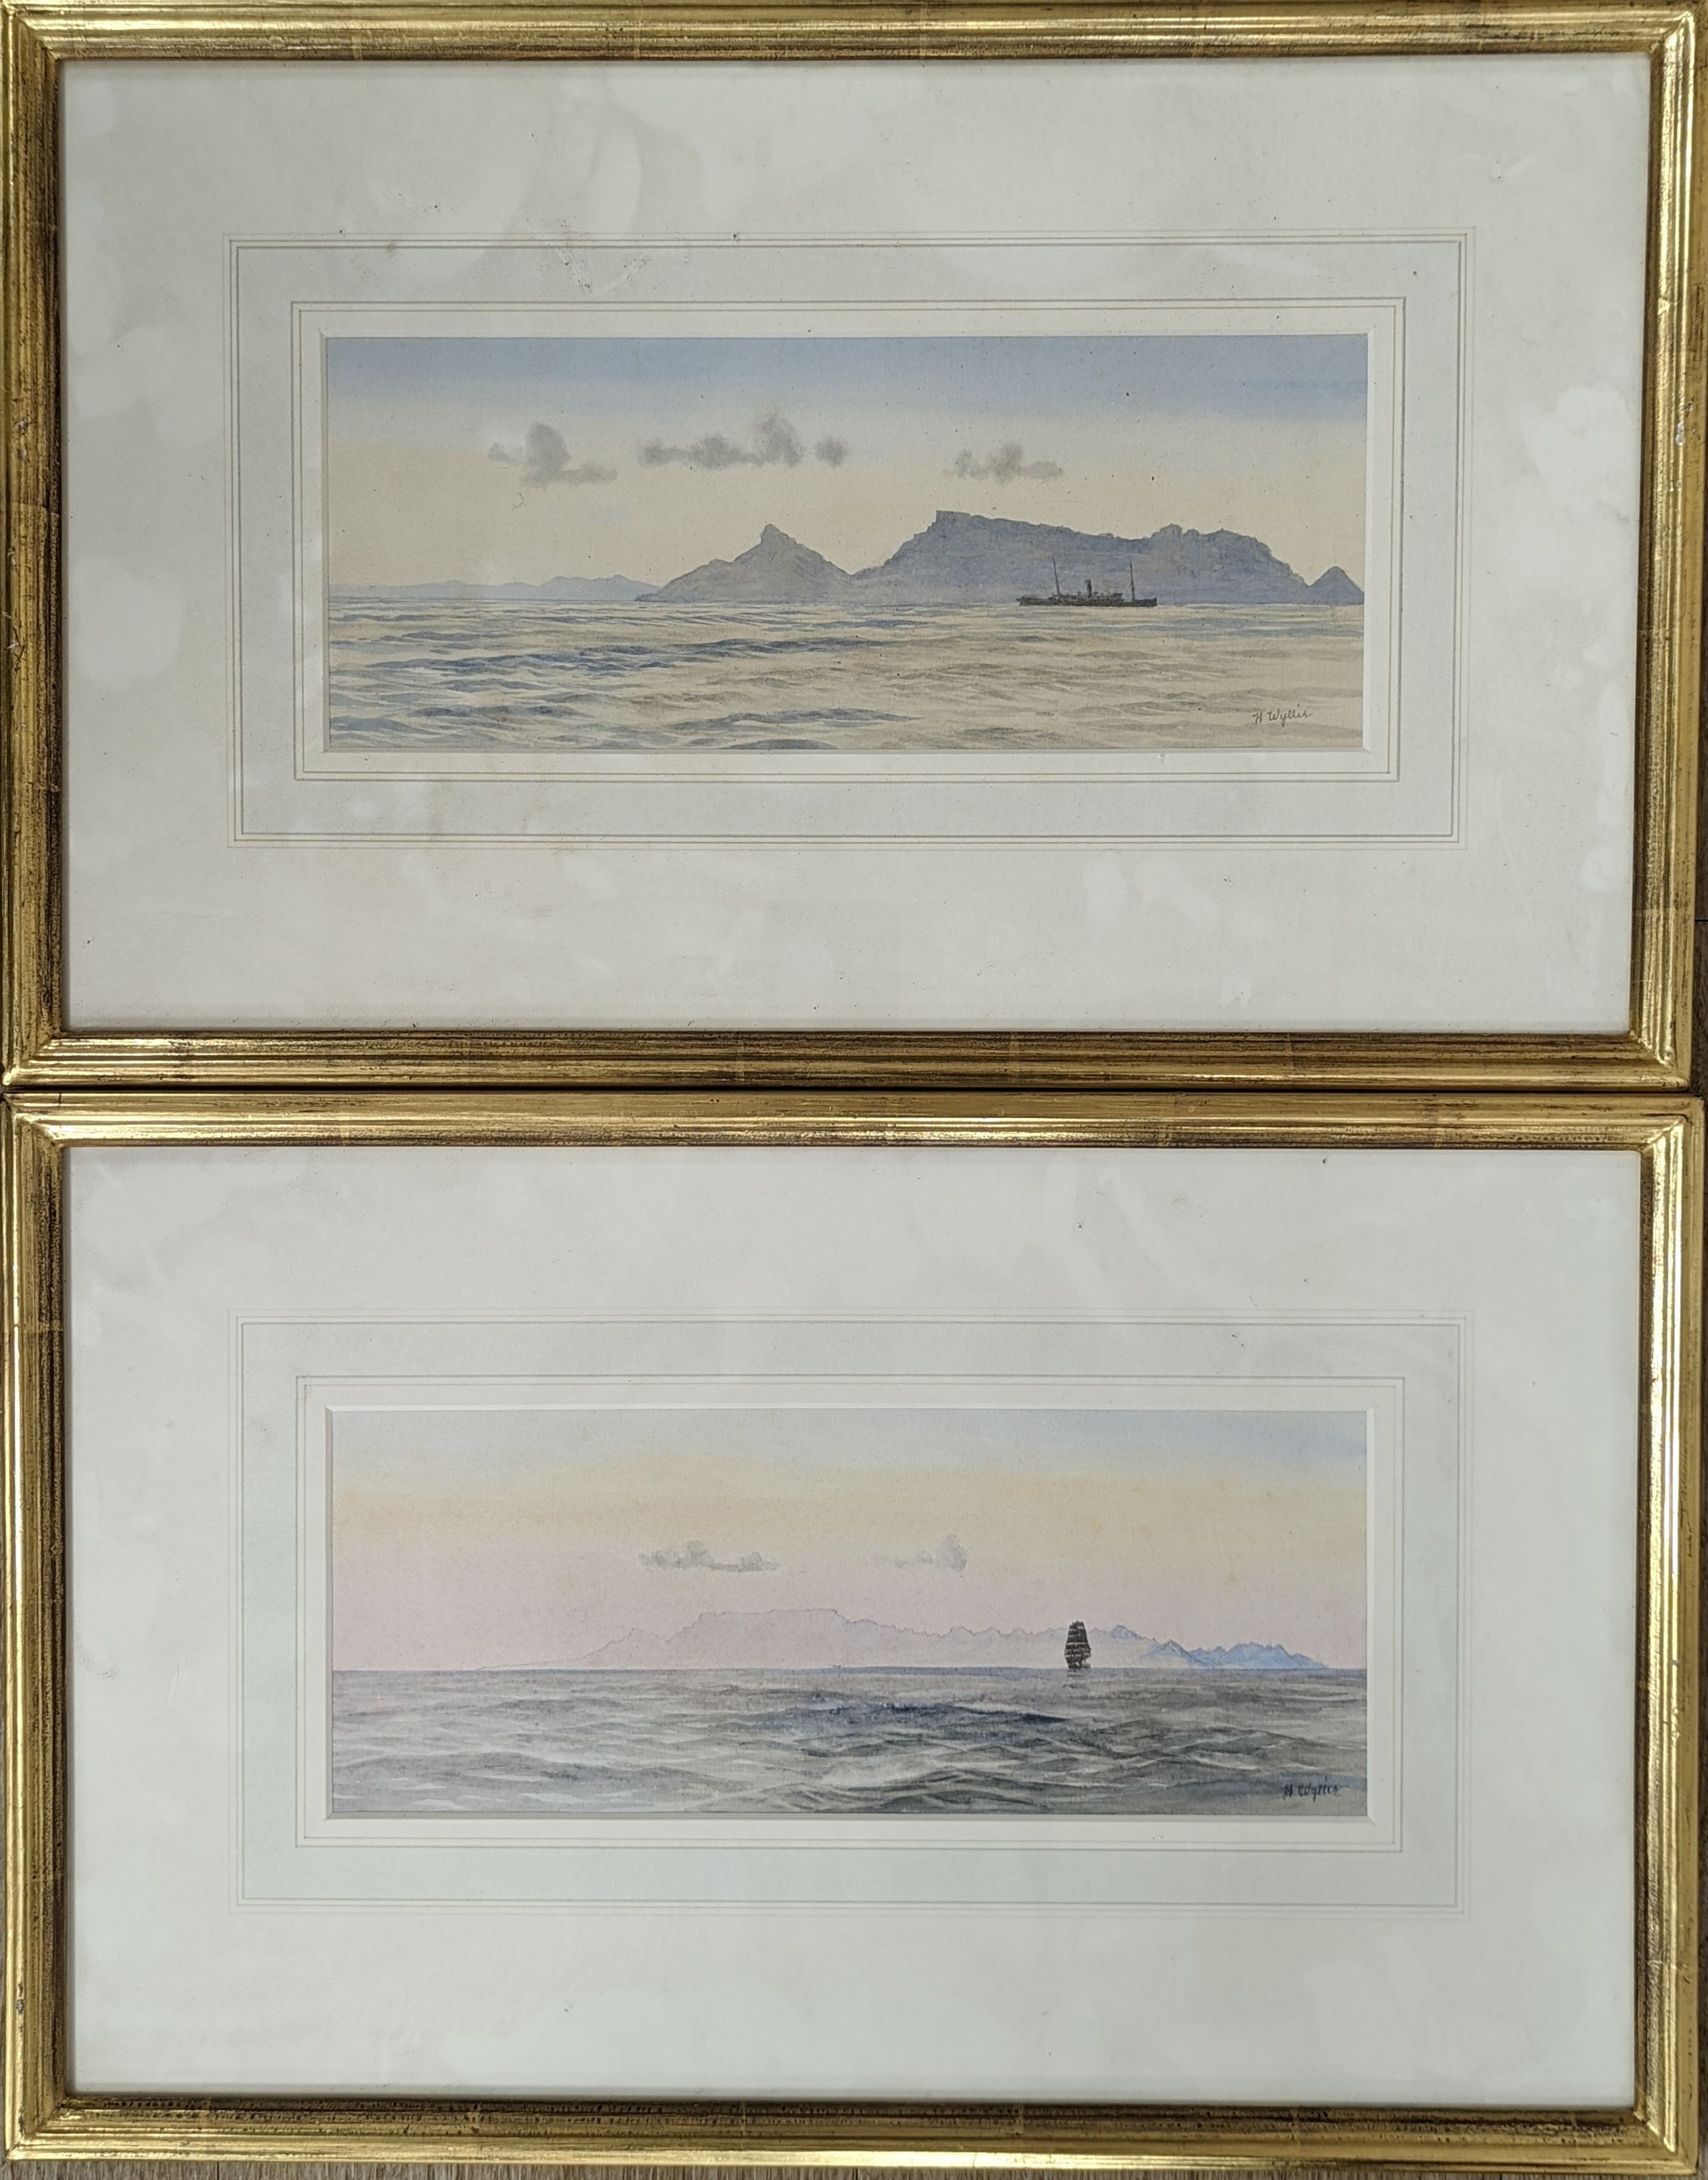 Harold Wyllie (1880-1973), pencil and watercolour, Views of Cape Town from the sea, signed, 11 x 28.5cm